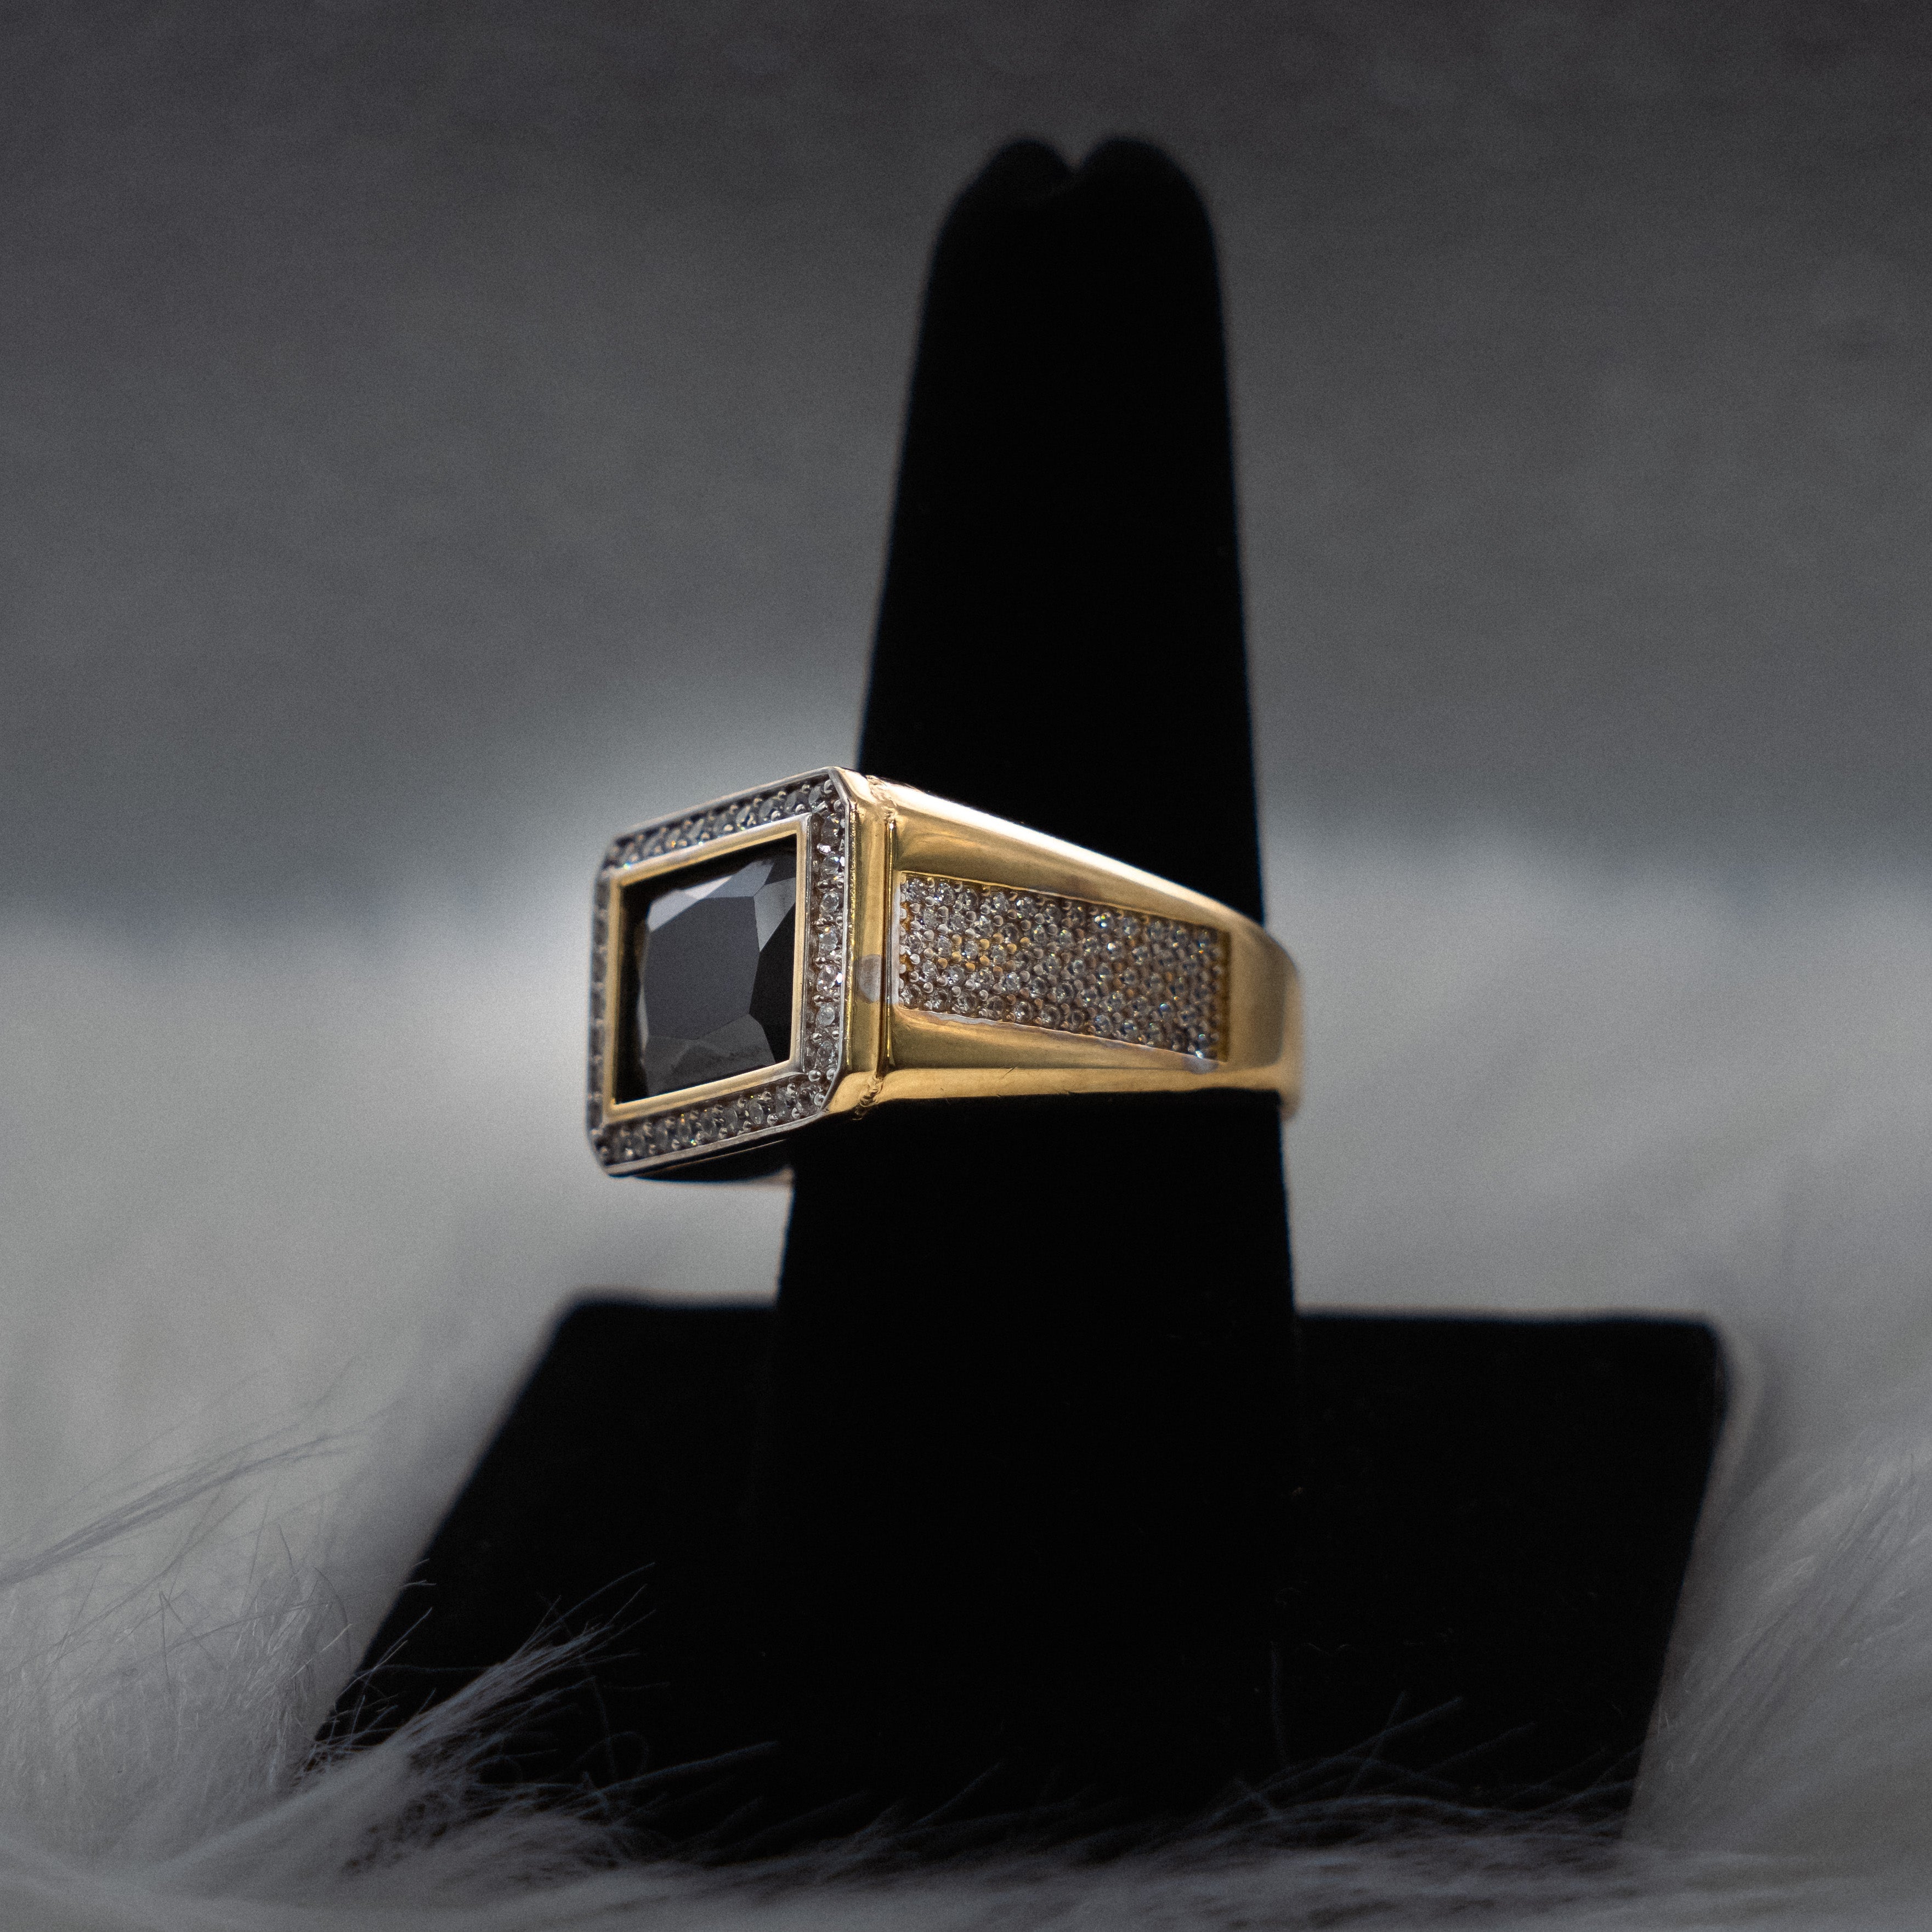 Black Stone Ring 10K Yellow Gold With Zirconia / 10.4gr / Size 10